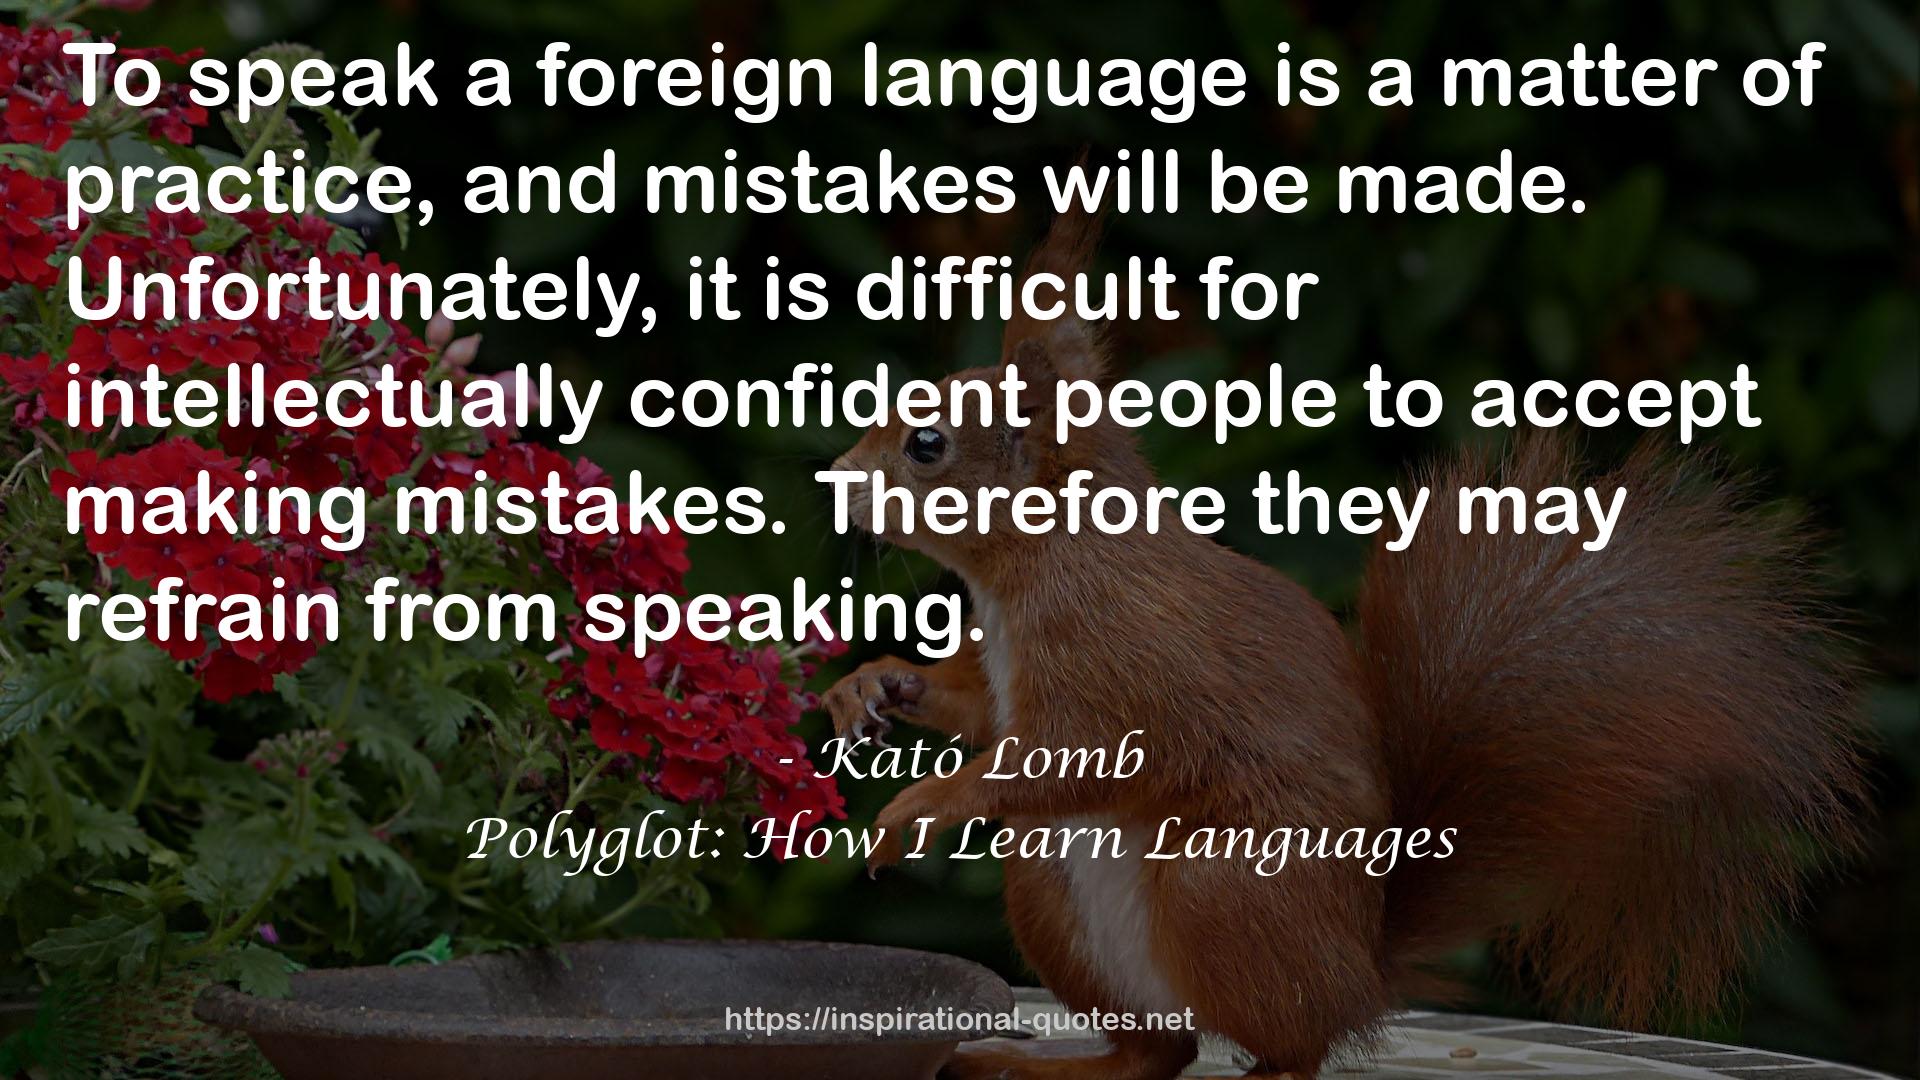 Polyglot: How I Learn Languages QUOTES